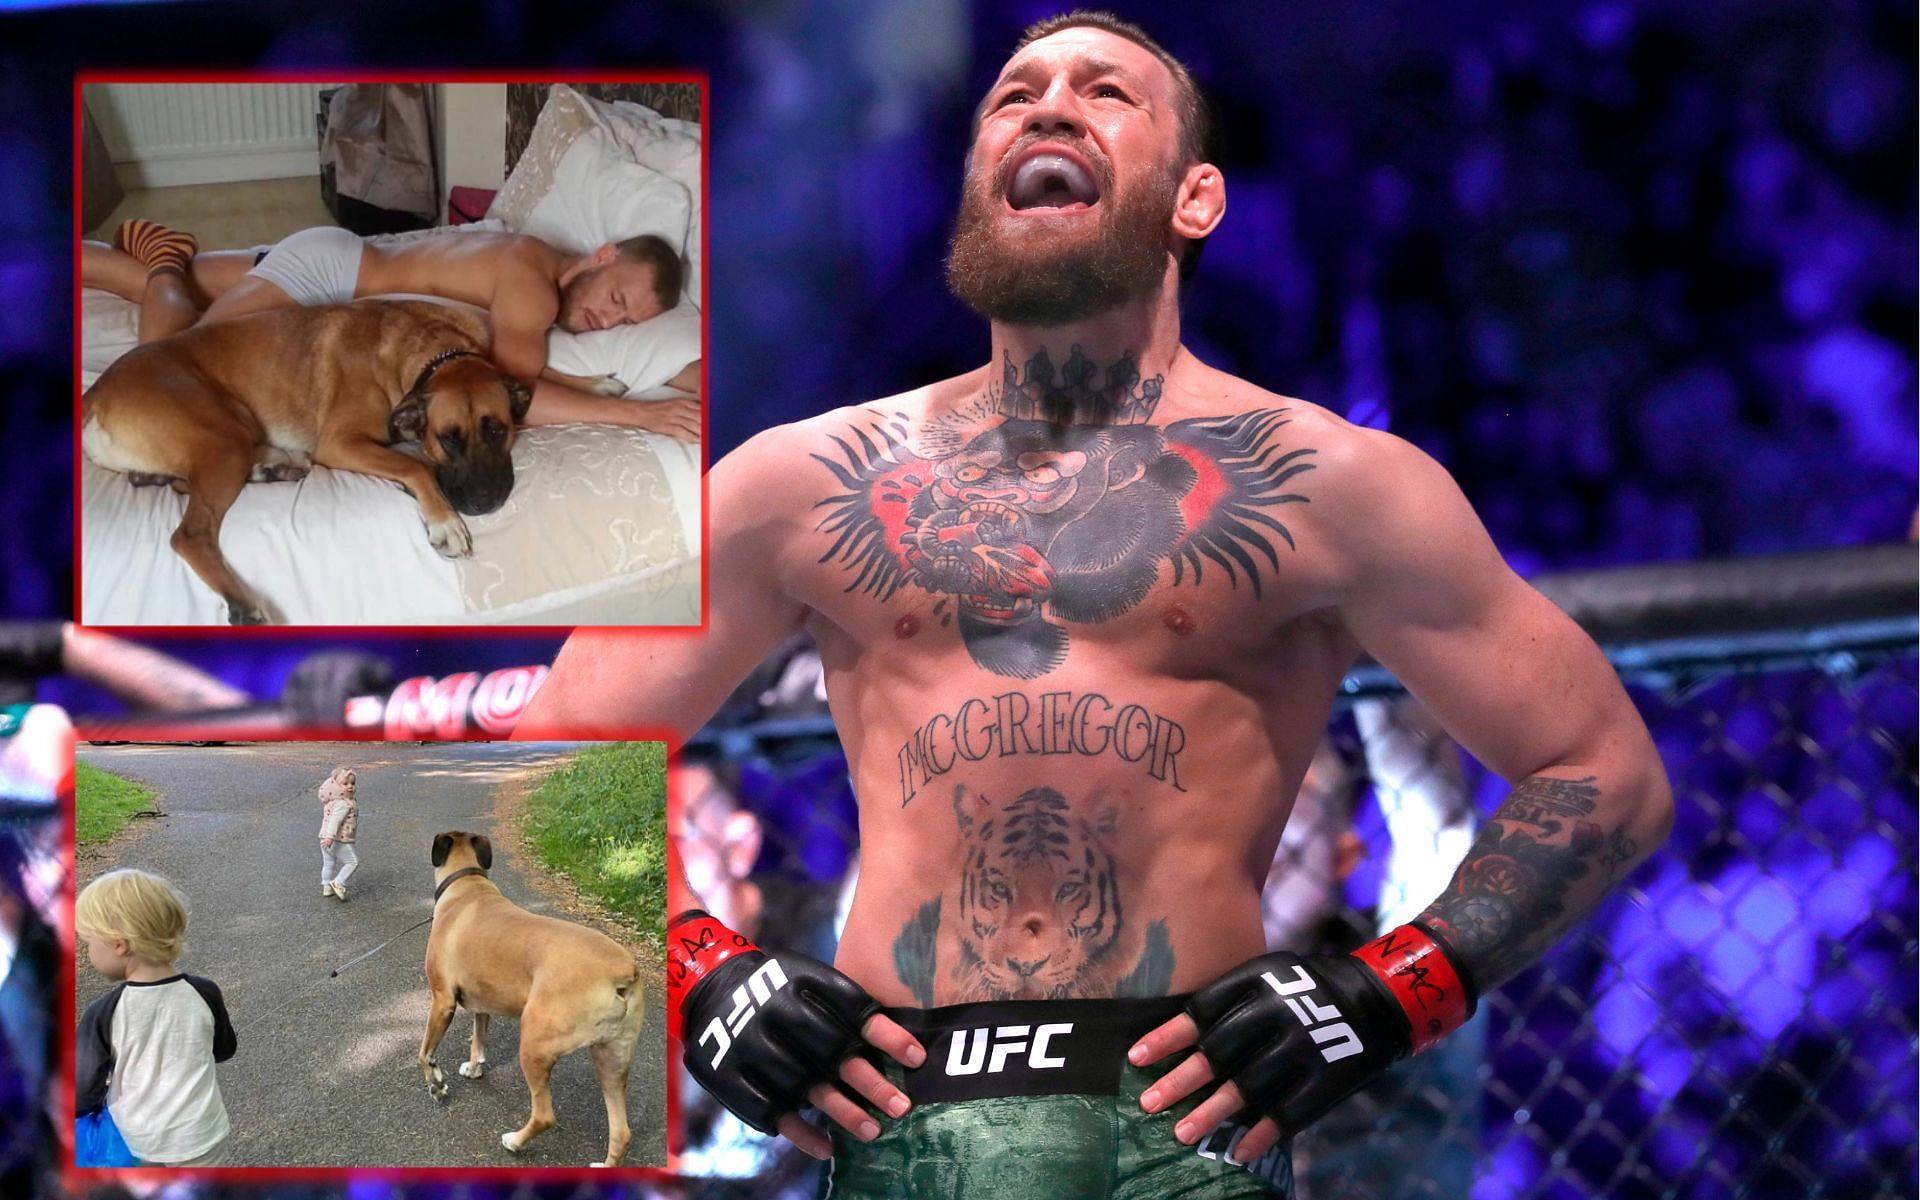 Conor McGregor with his pet [Images via: @thenotoriousmma on Twitter]